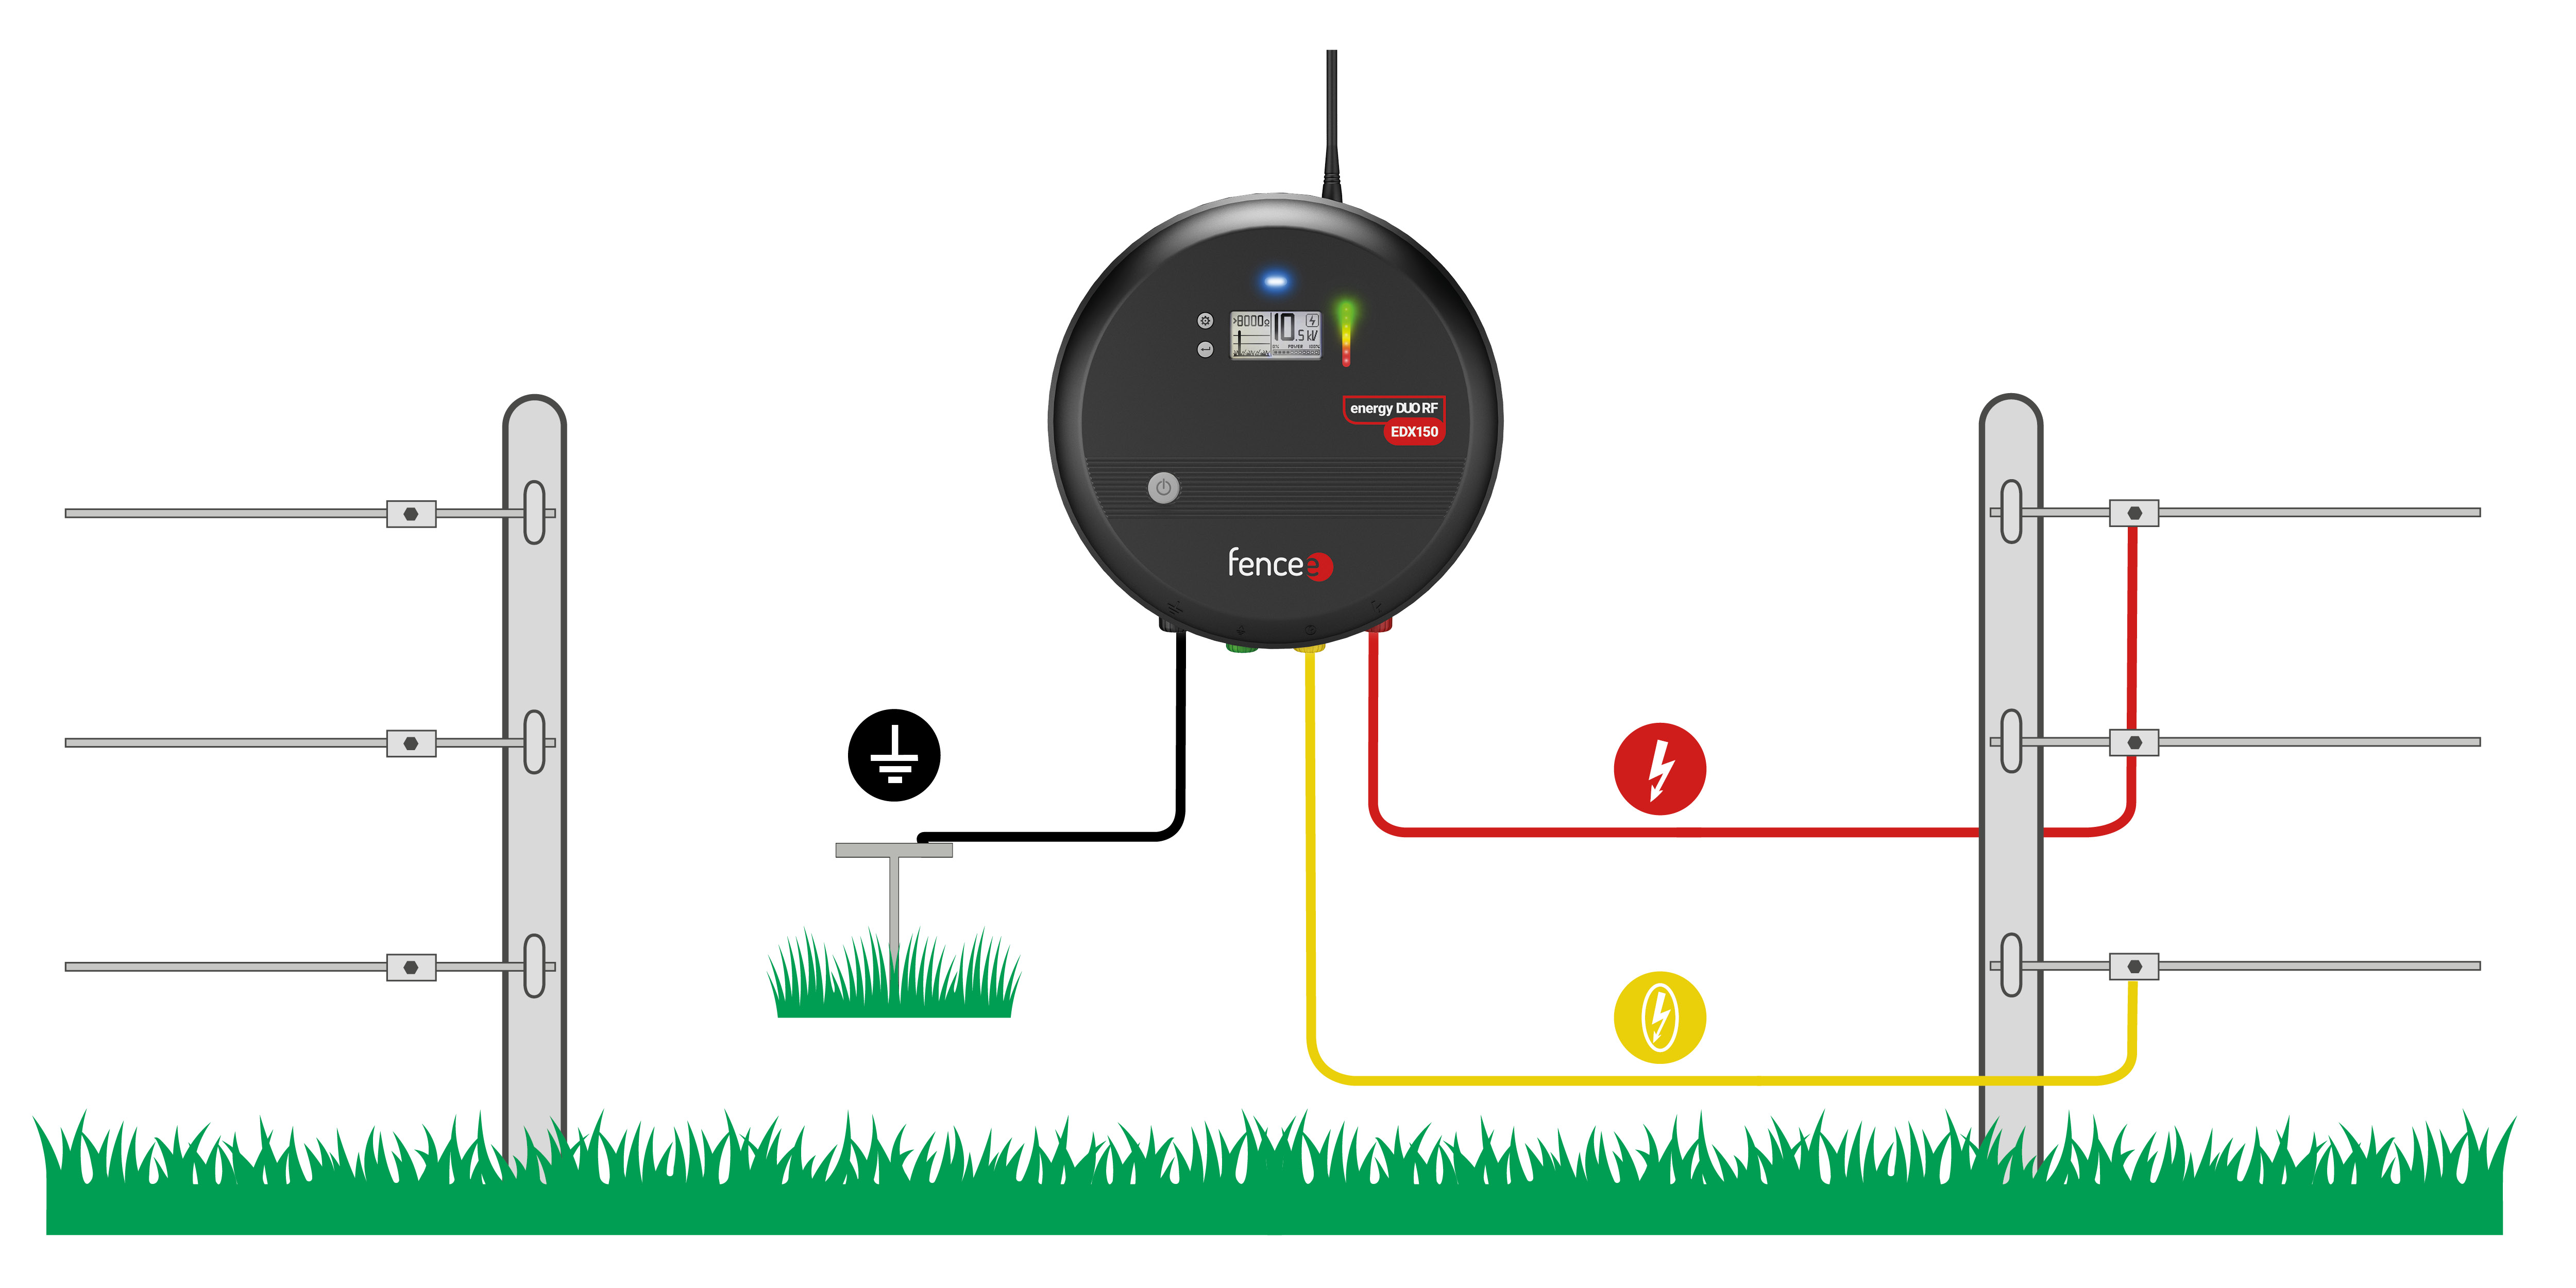 Illustration of connecting the lower wire to the yellow terminal with reduced power, in a location where overgrown grass may be expected